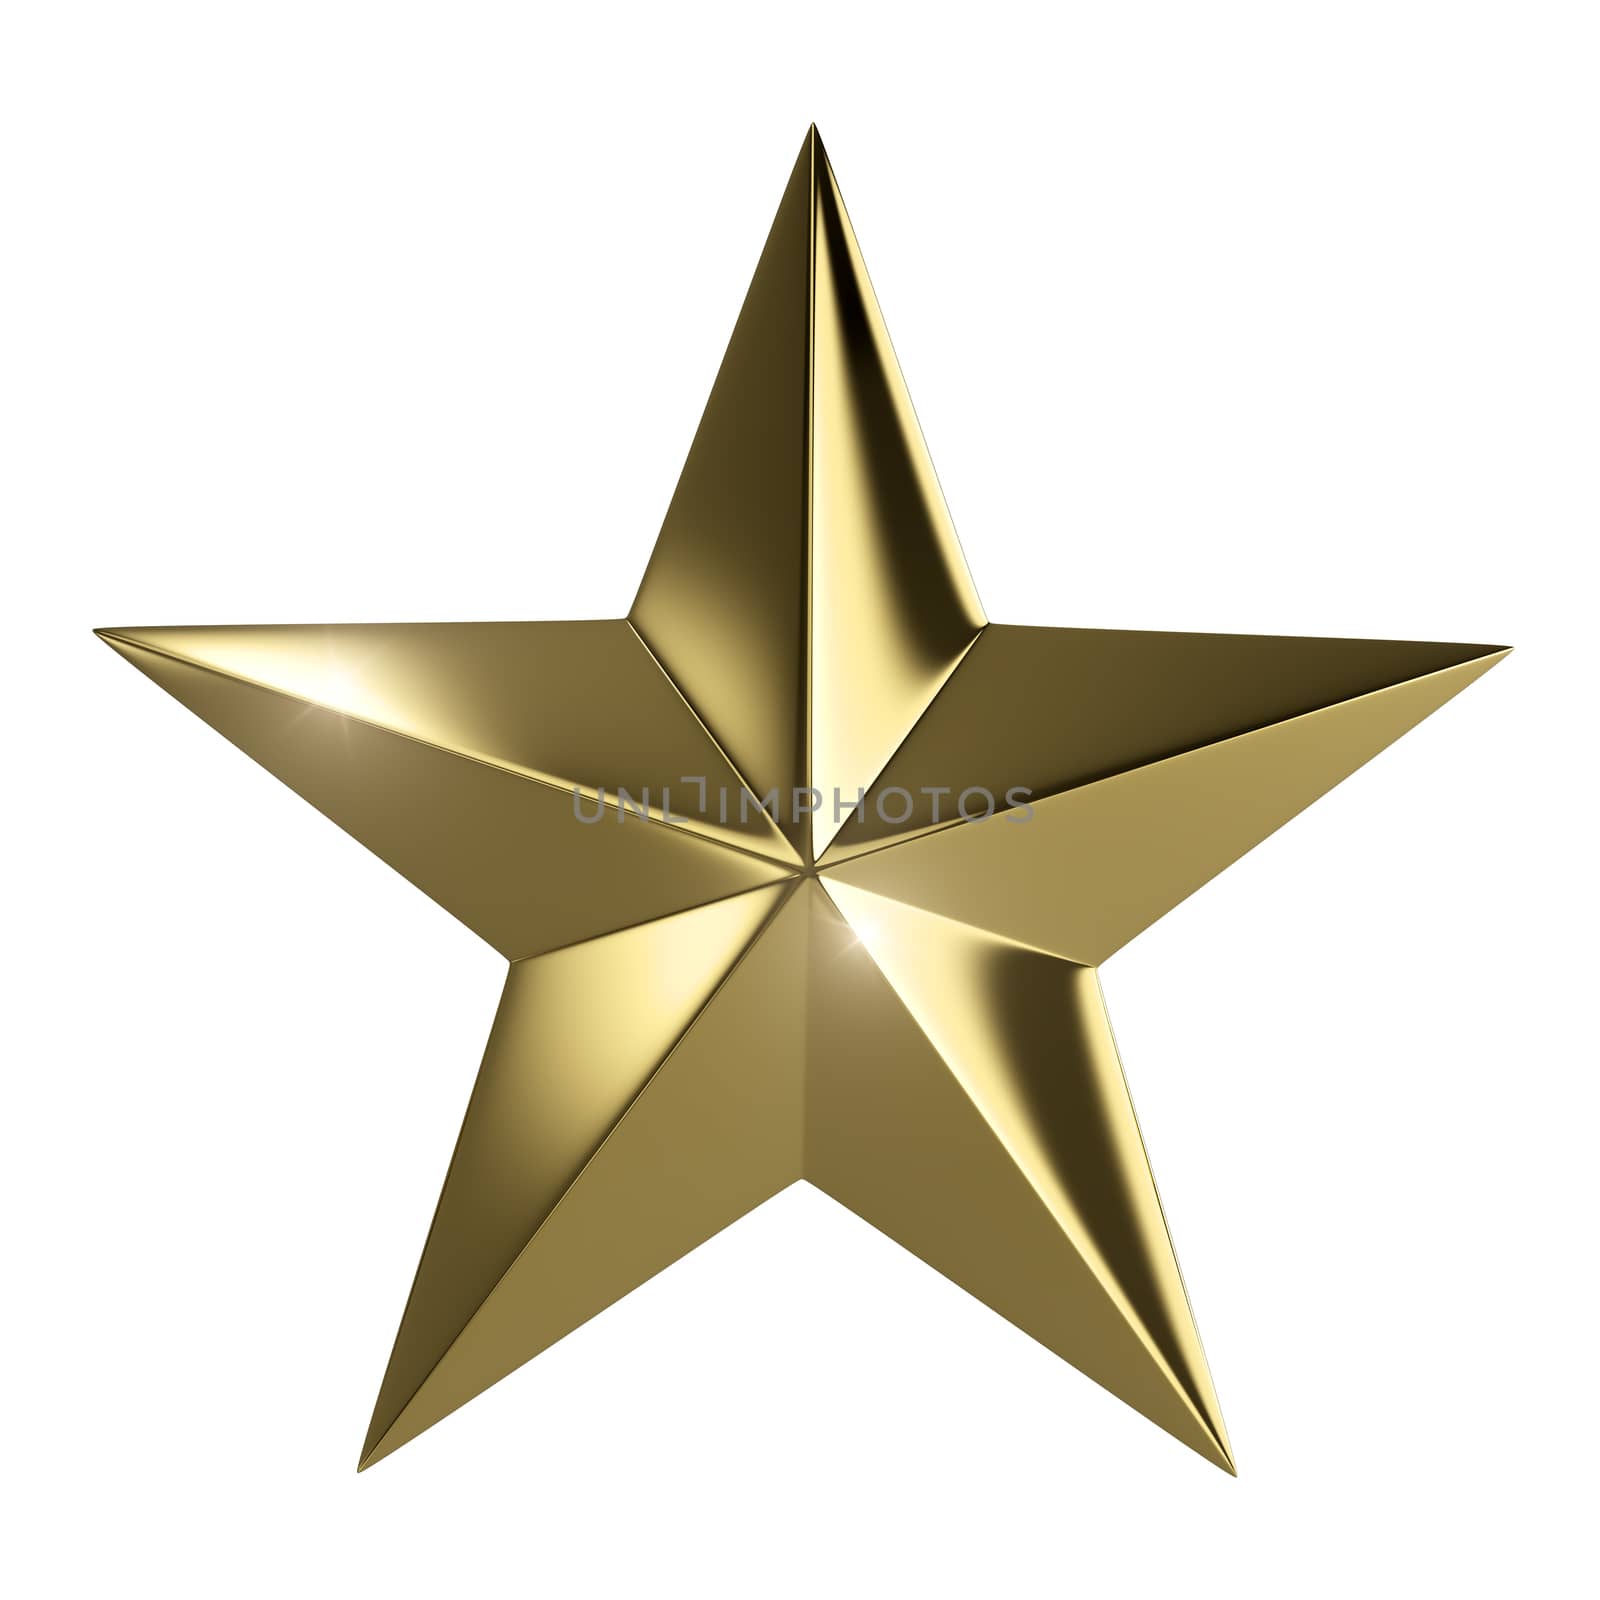 Golden star with clipping path
 by 123dartist